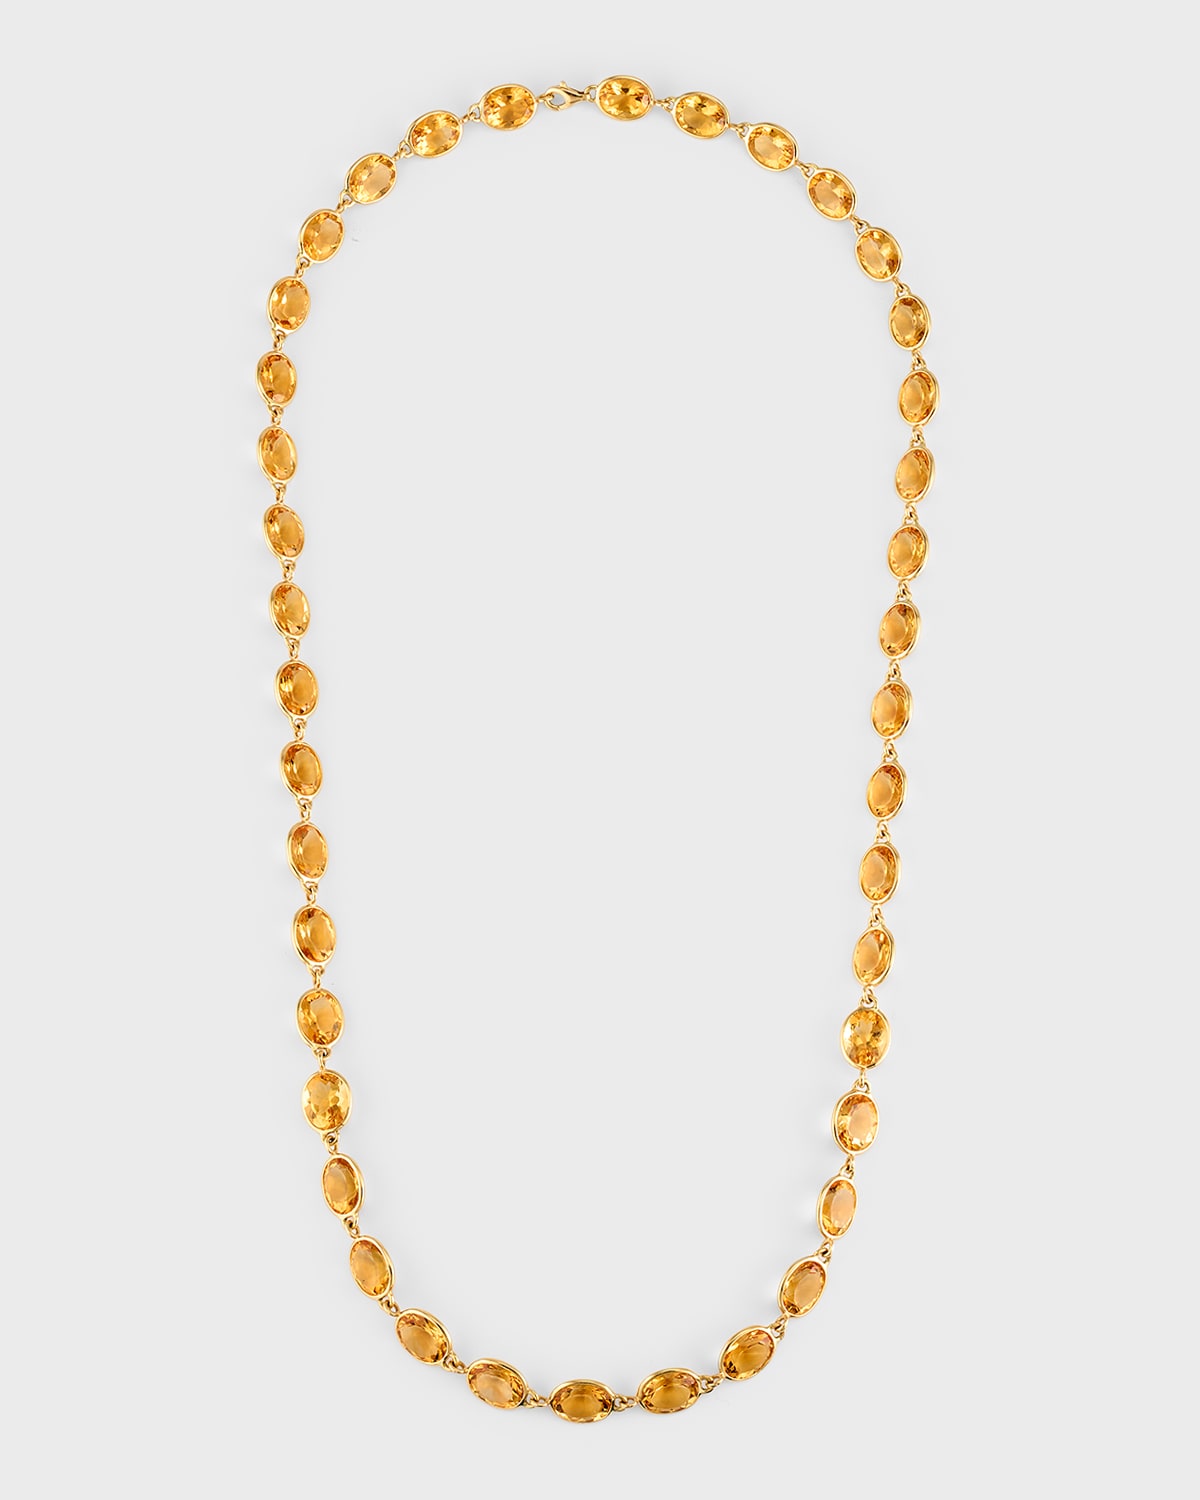 18K Yellow Gold 40 Oval Citrine Long Necklace, 24"L